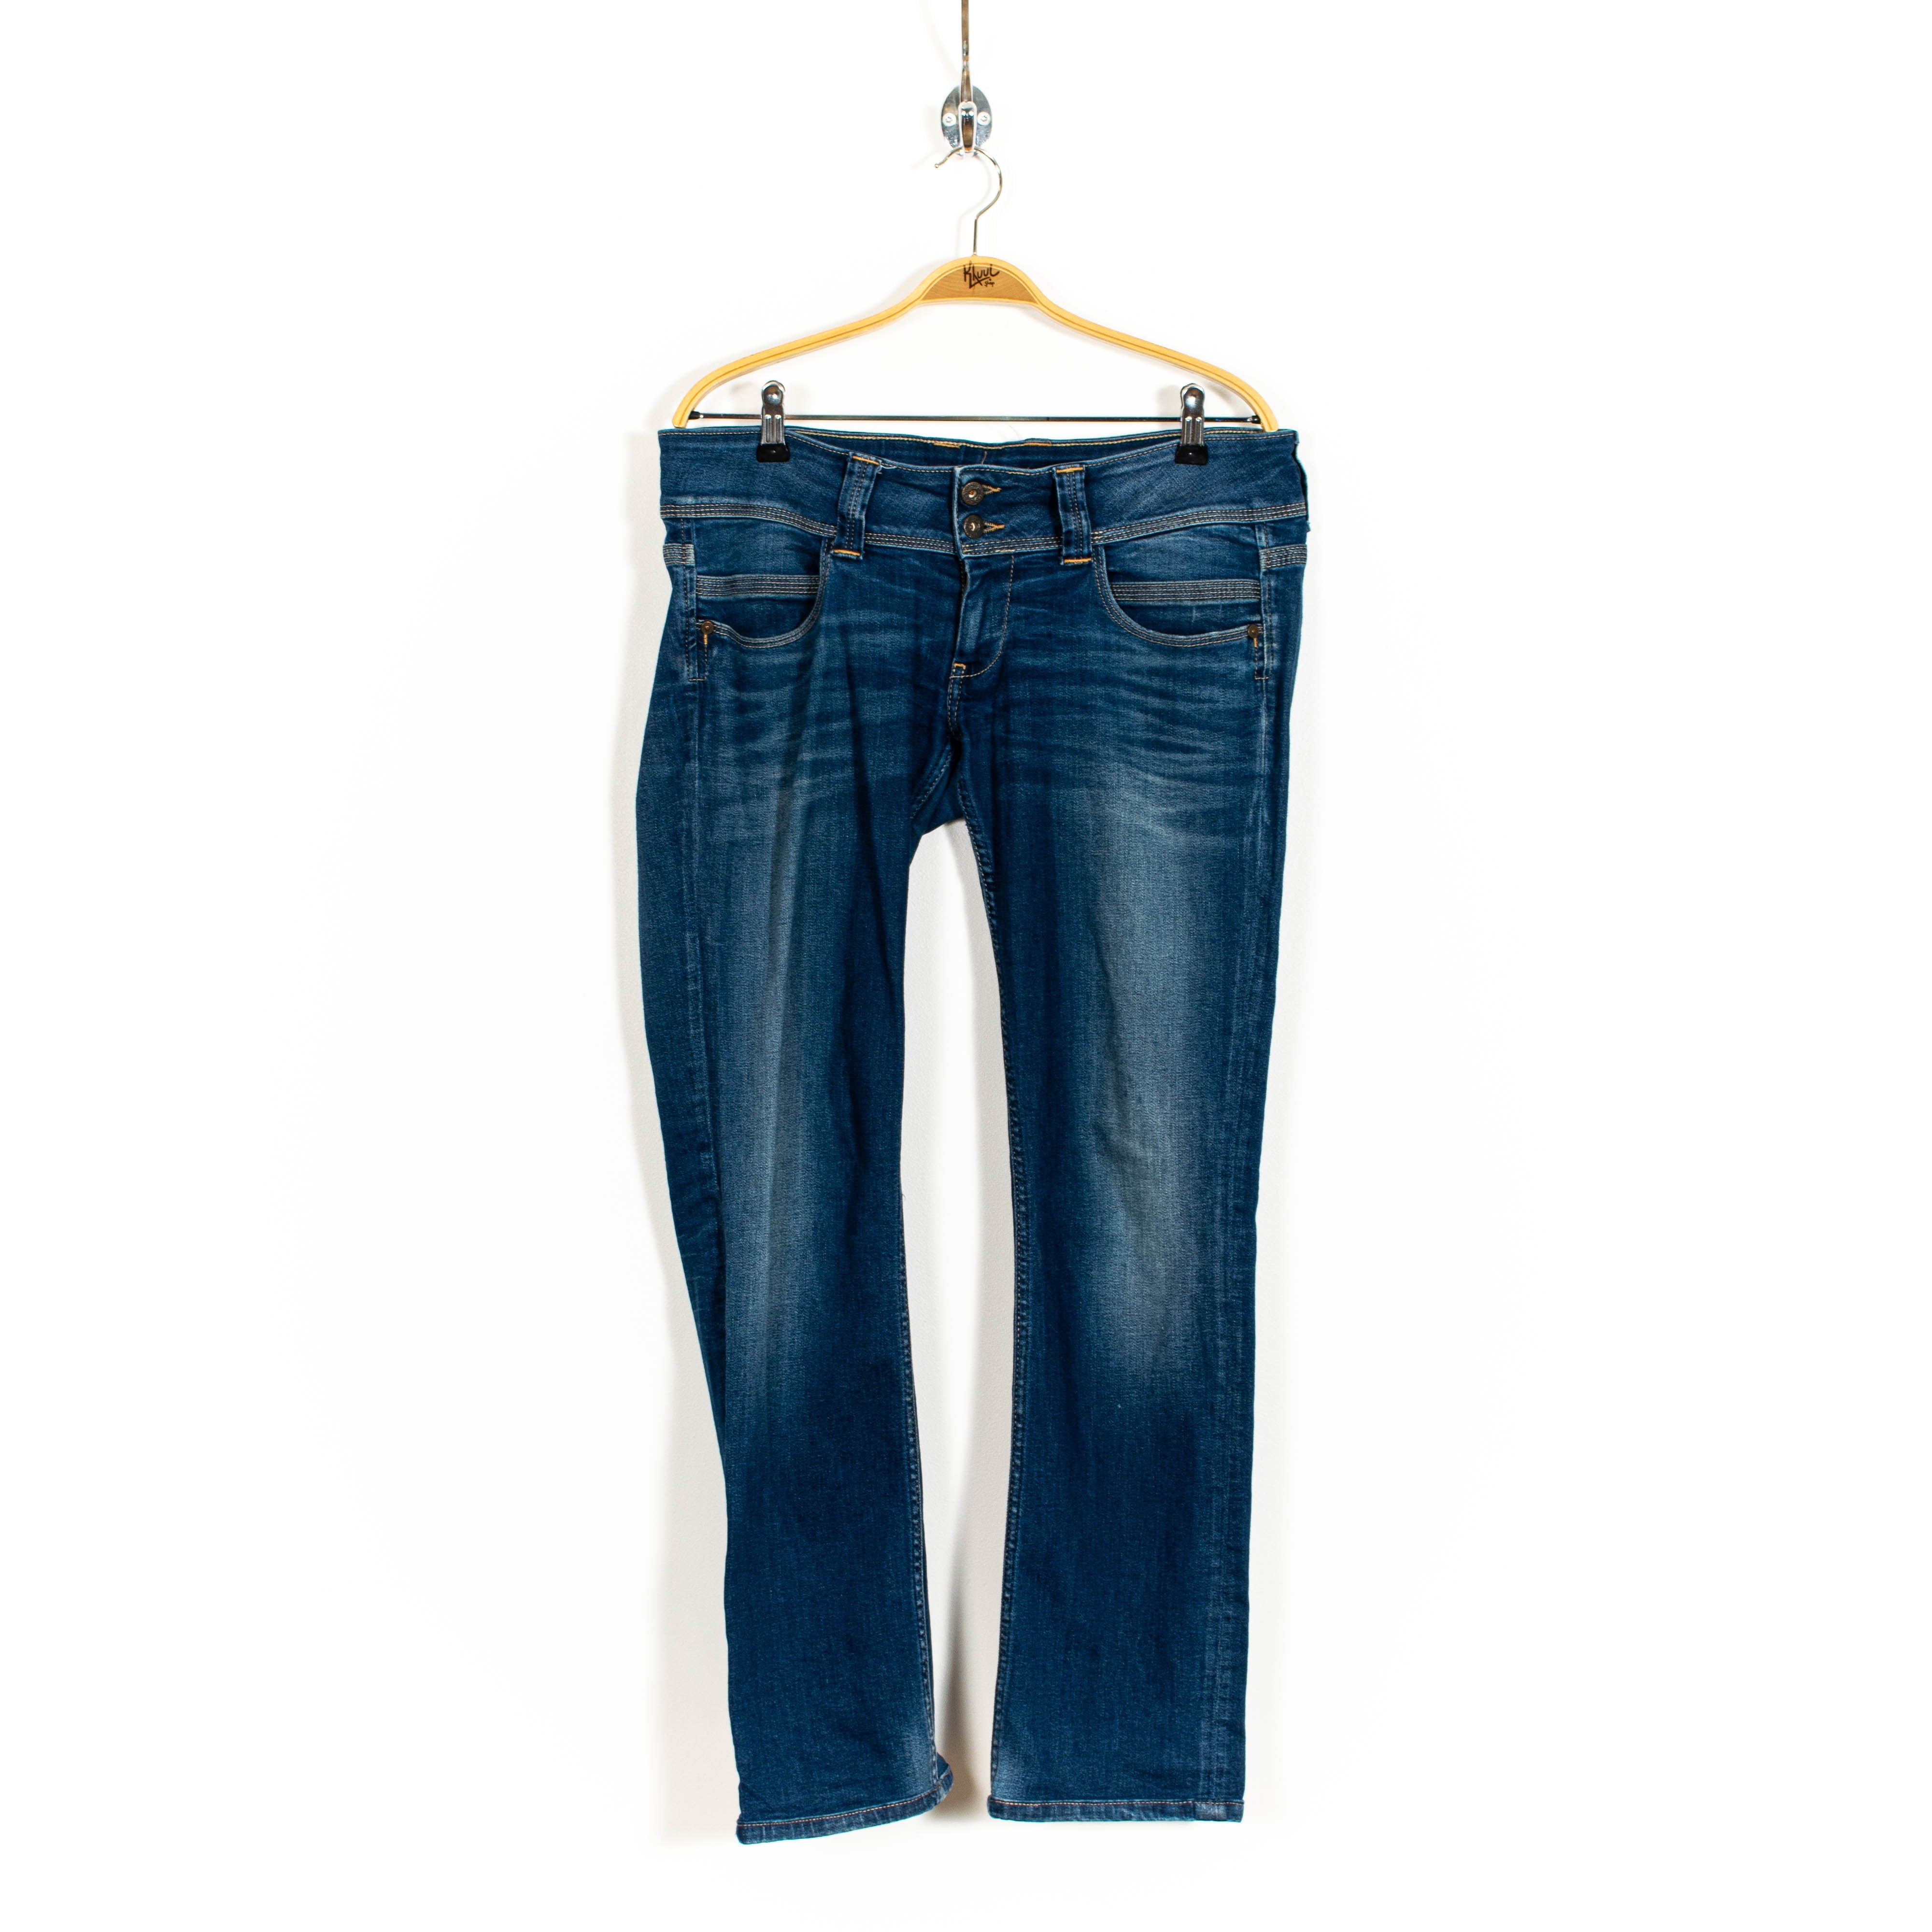 Pepe Jeans Medium Washed Low Waisted Straight Leg Jeans Womens US36